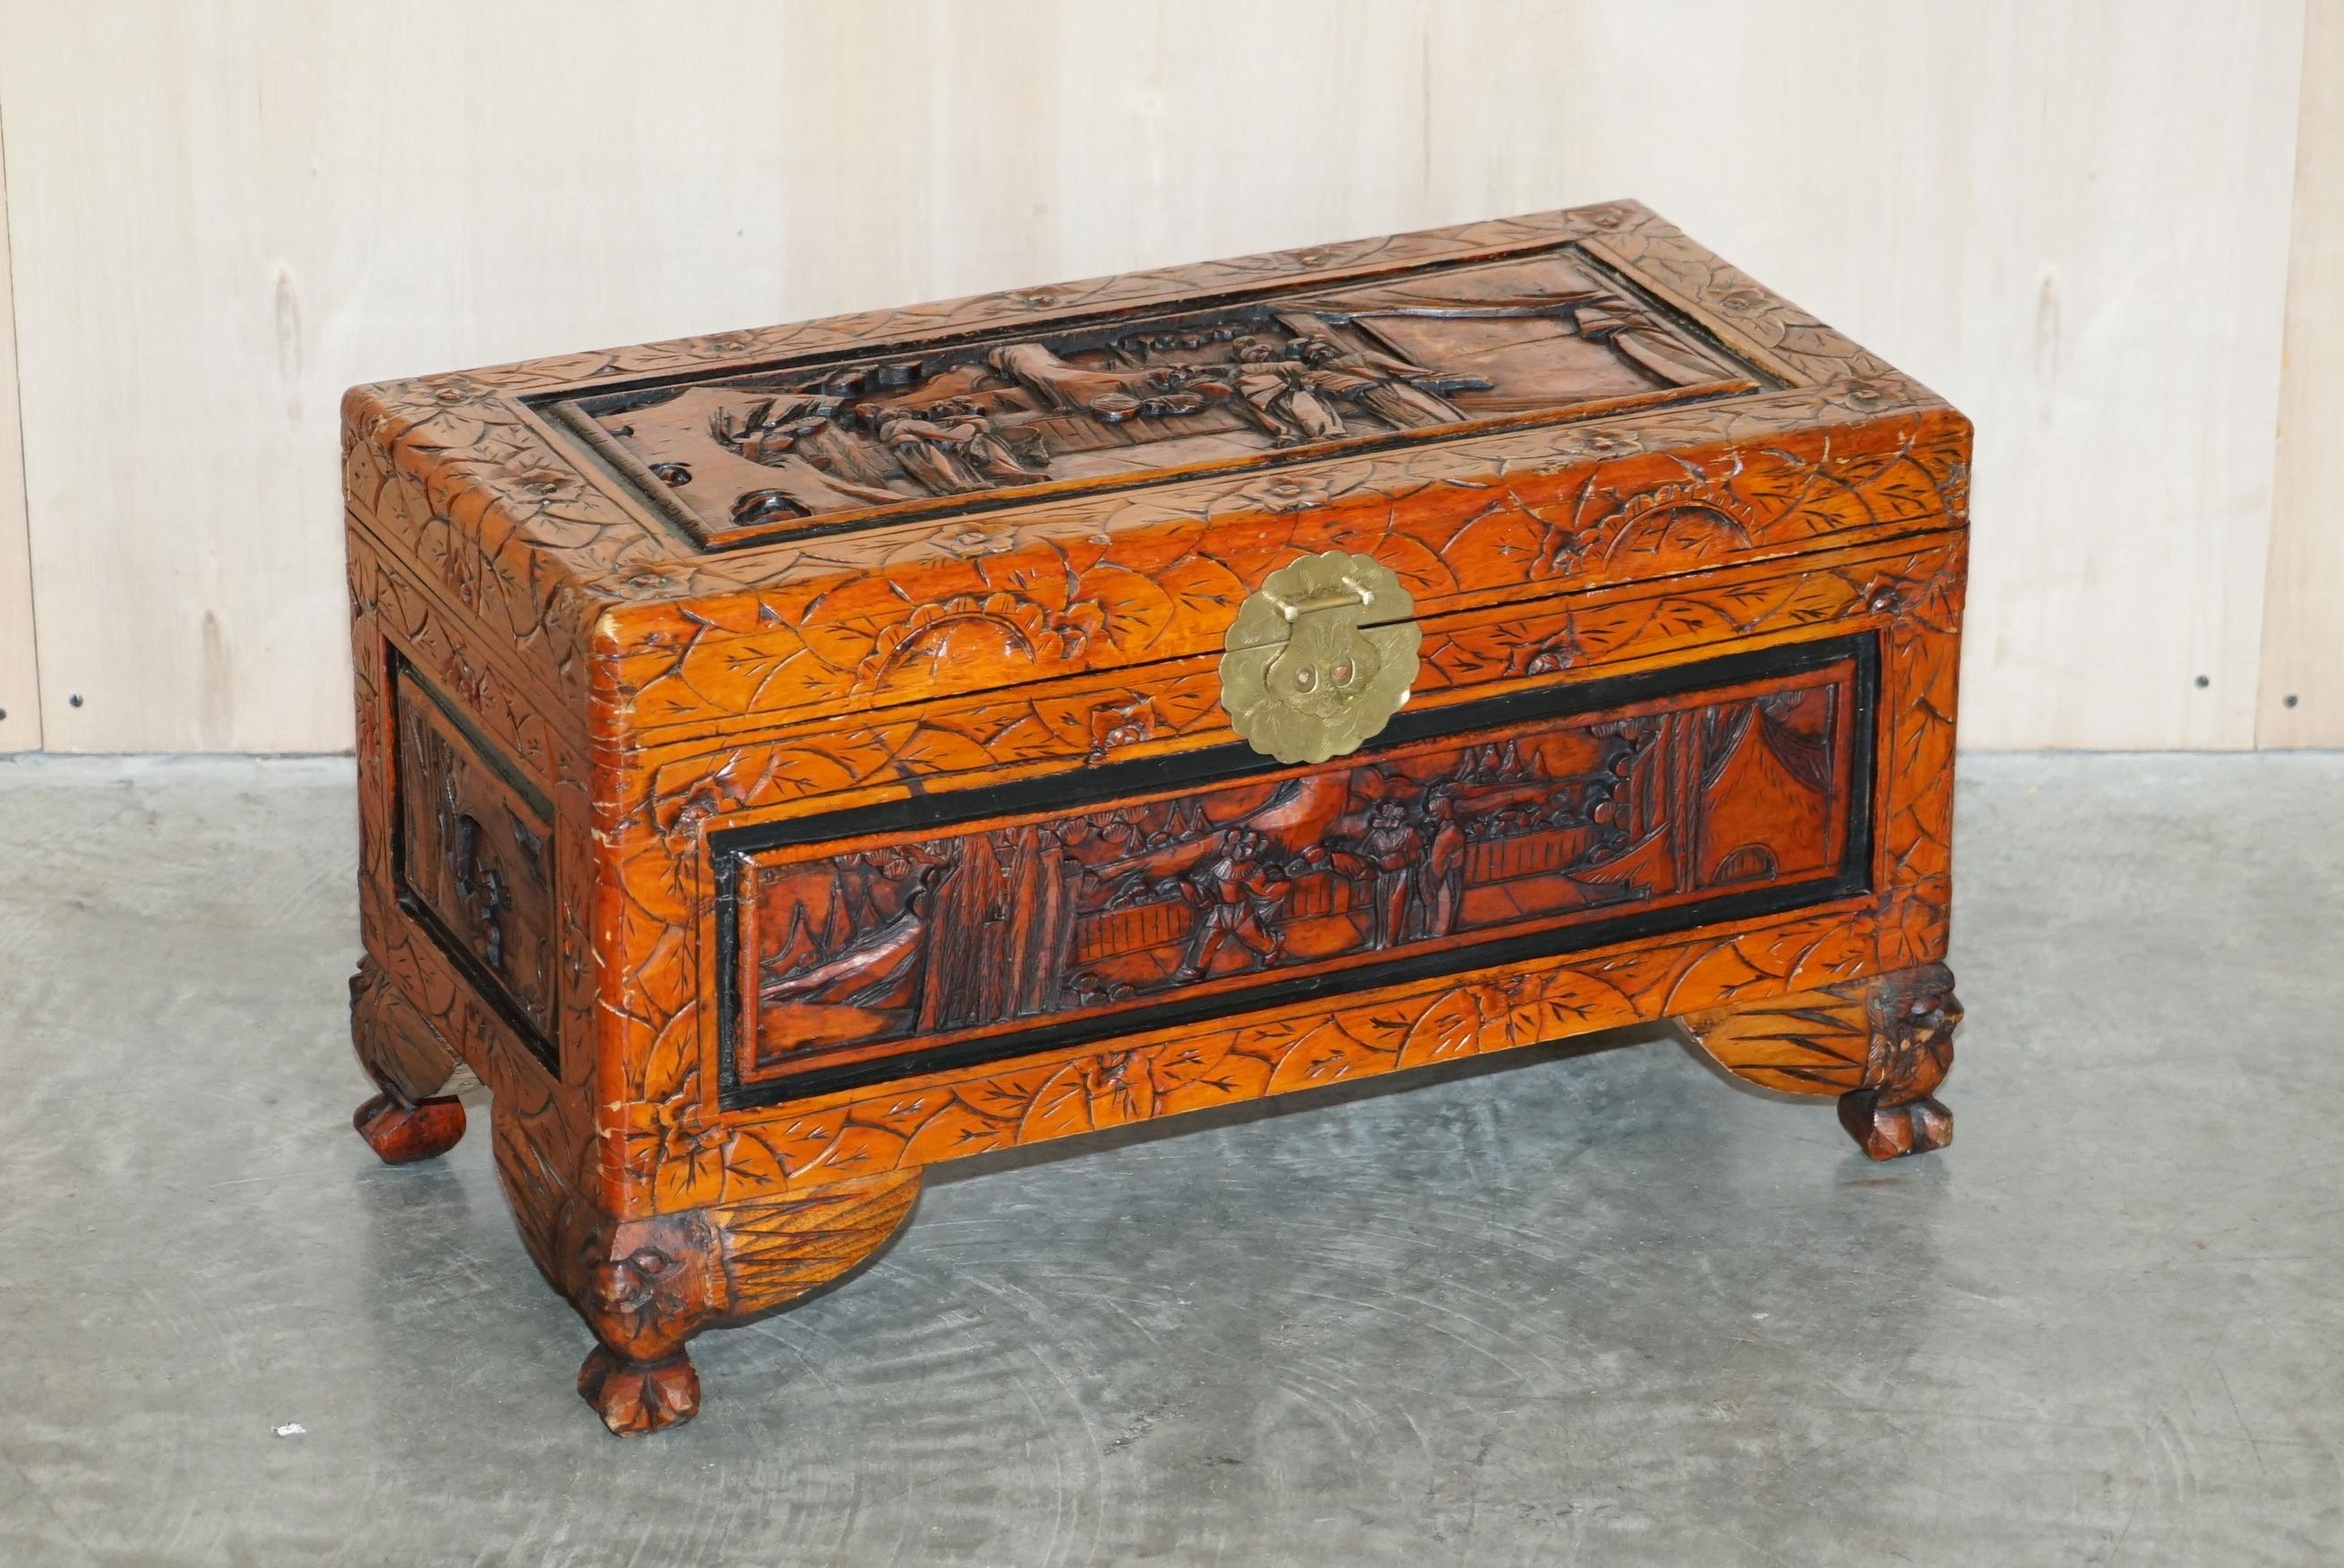 We are delighted to offer for sale this very nice circa 1900’s Chinese export Camphor wood travelling chest which has been ornately carved throughout 

A good looking and well made piece, this is a medium size, ideal for storage linens or using as